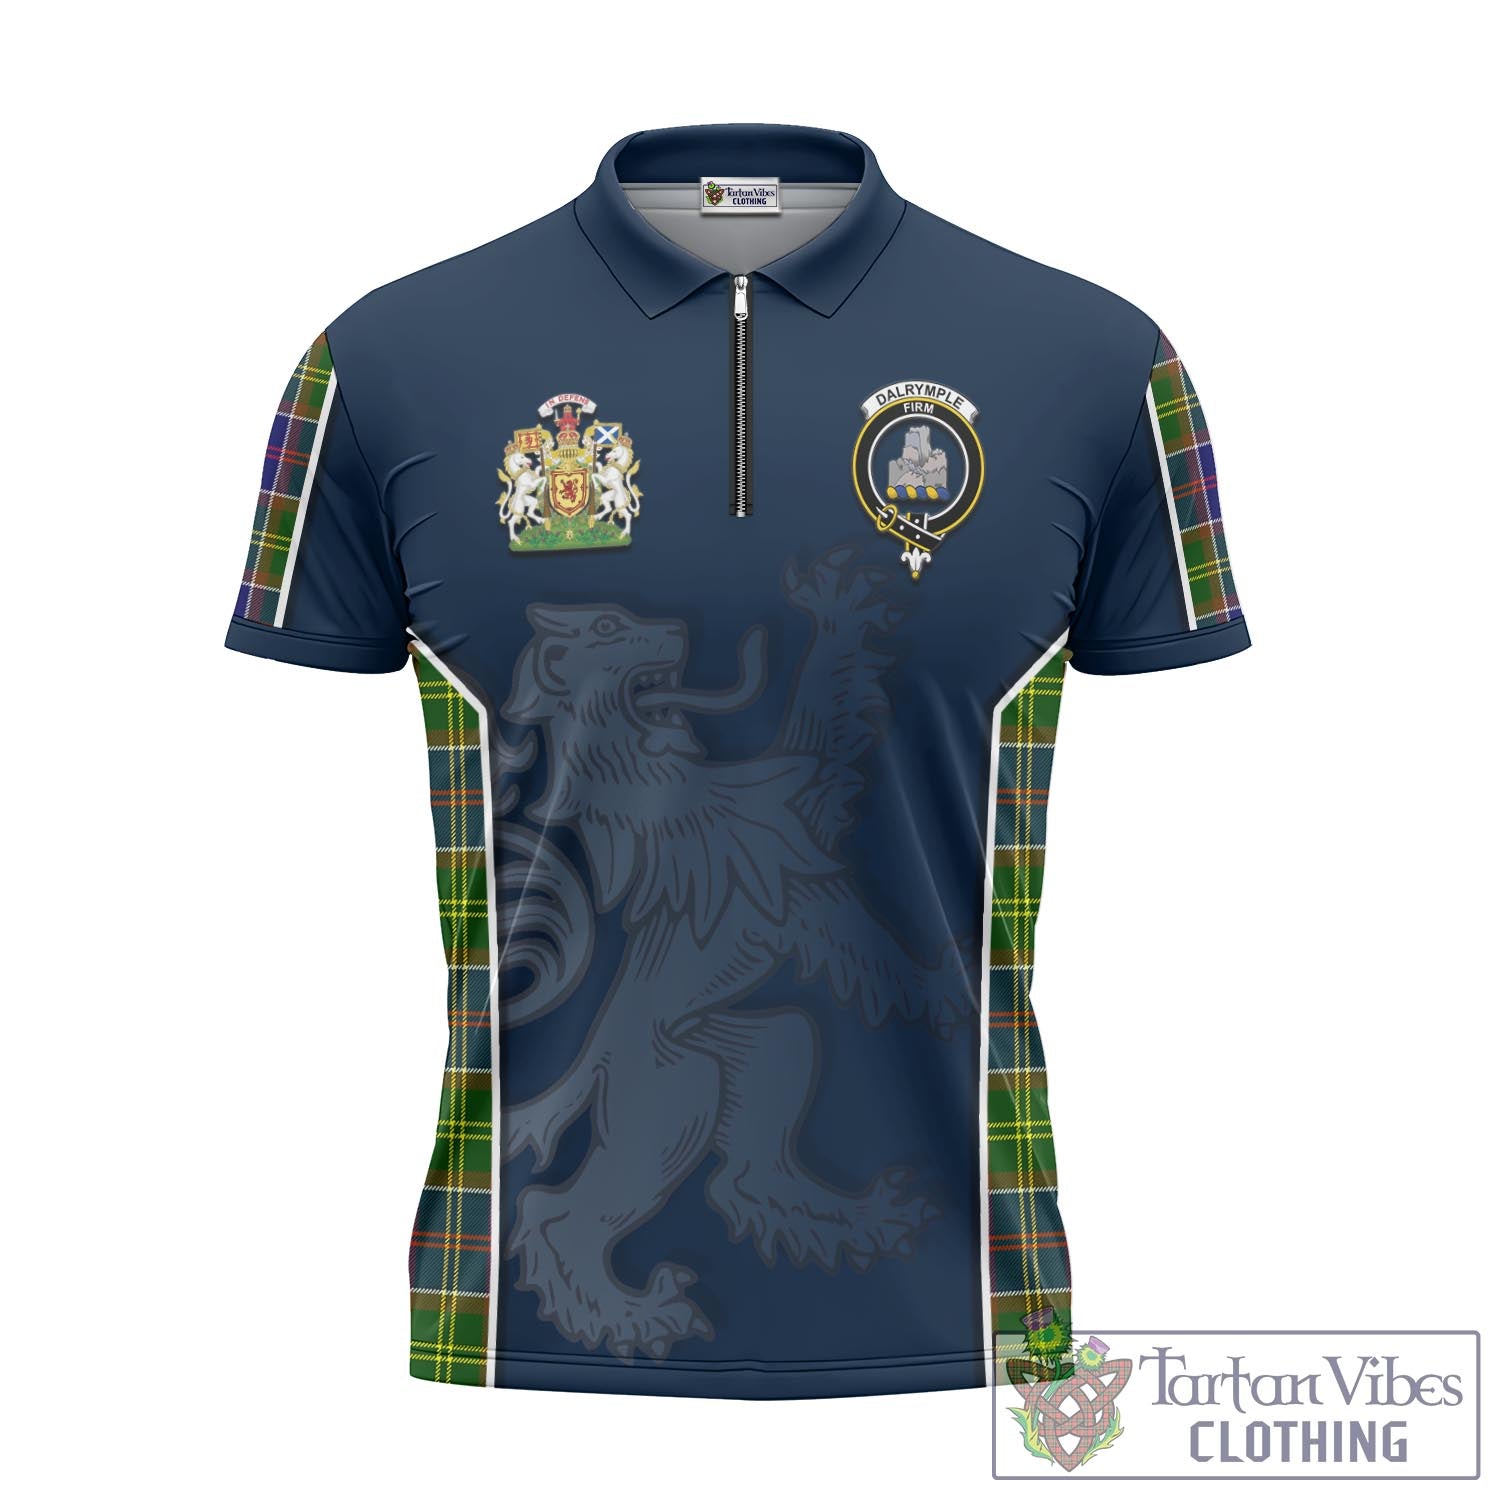 Tartan Vibes Clothing Dalrymple Tartan Zipper Polo Shirt with Family Crest and Lion Rampant Vibes Sport Style